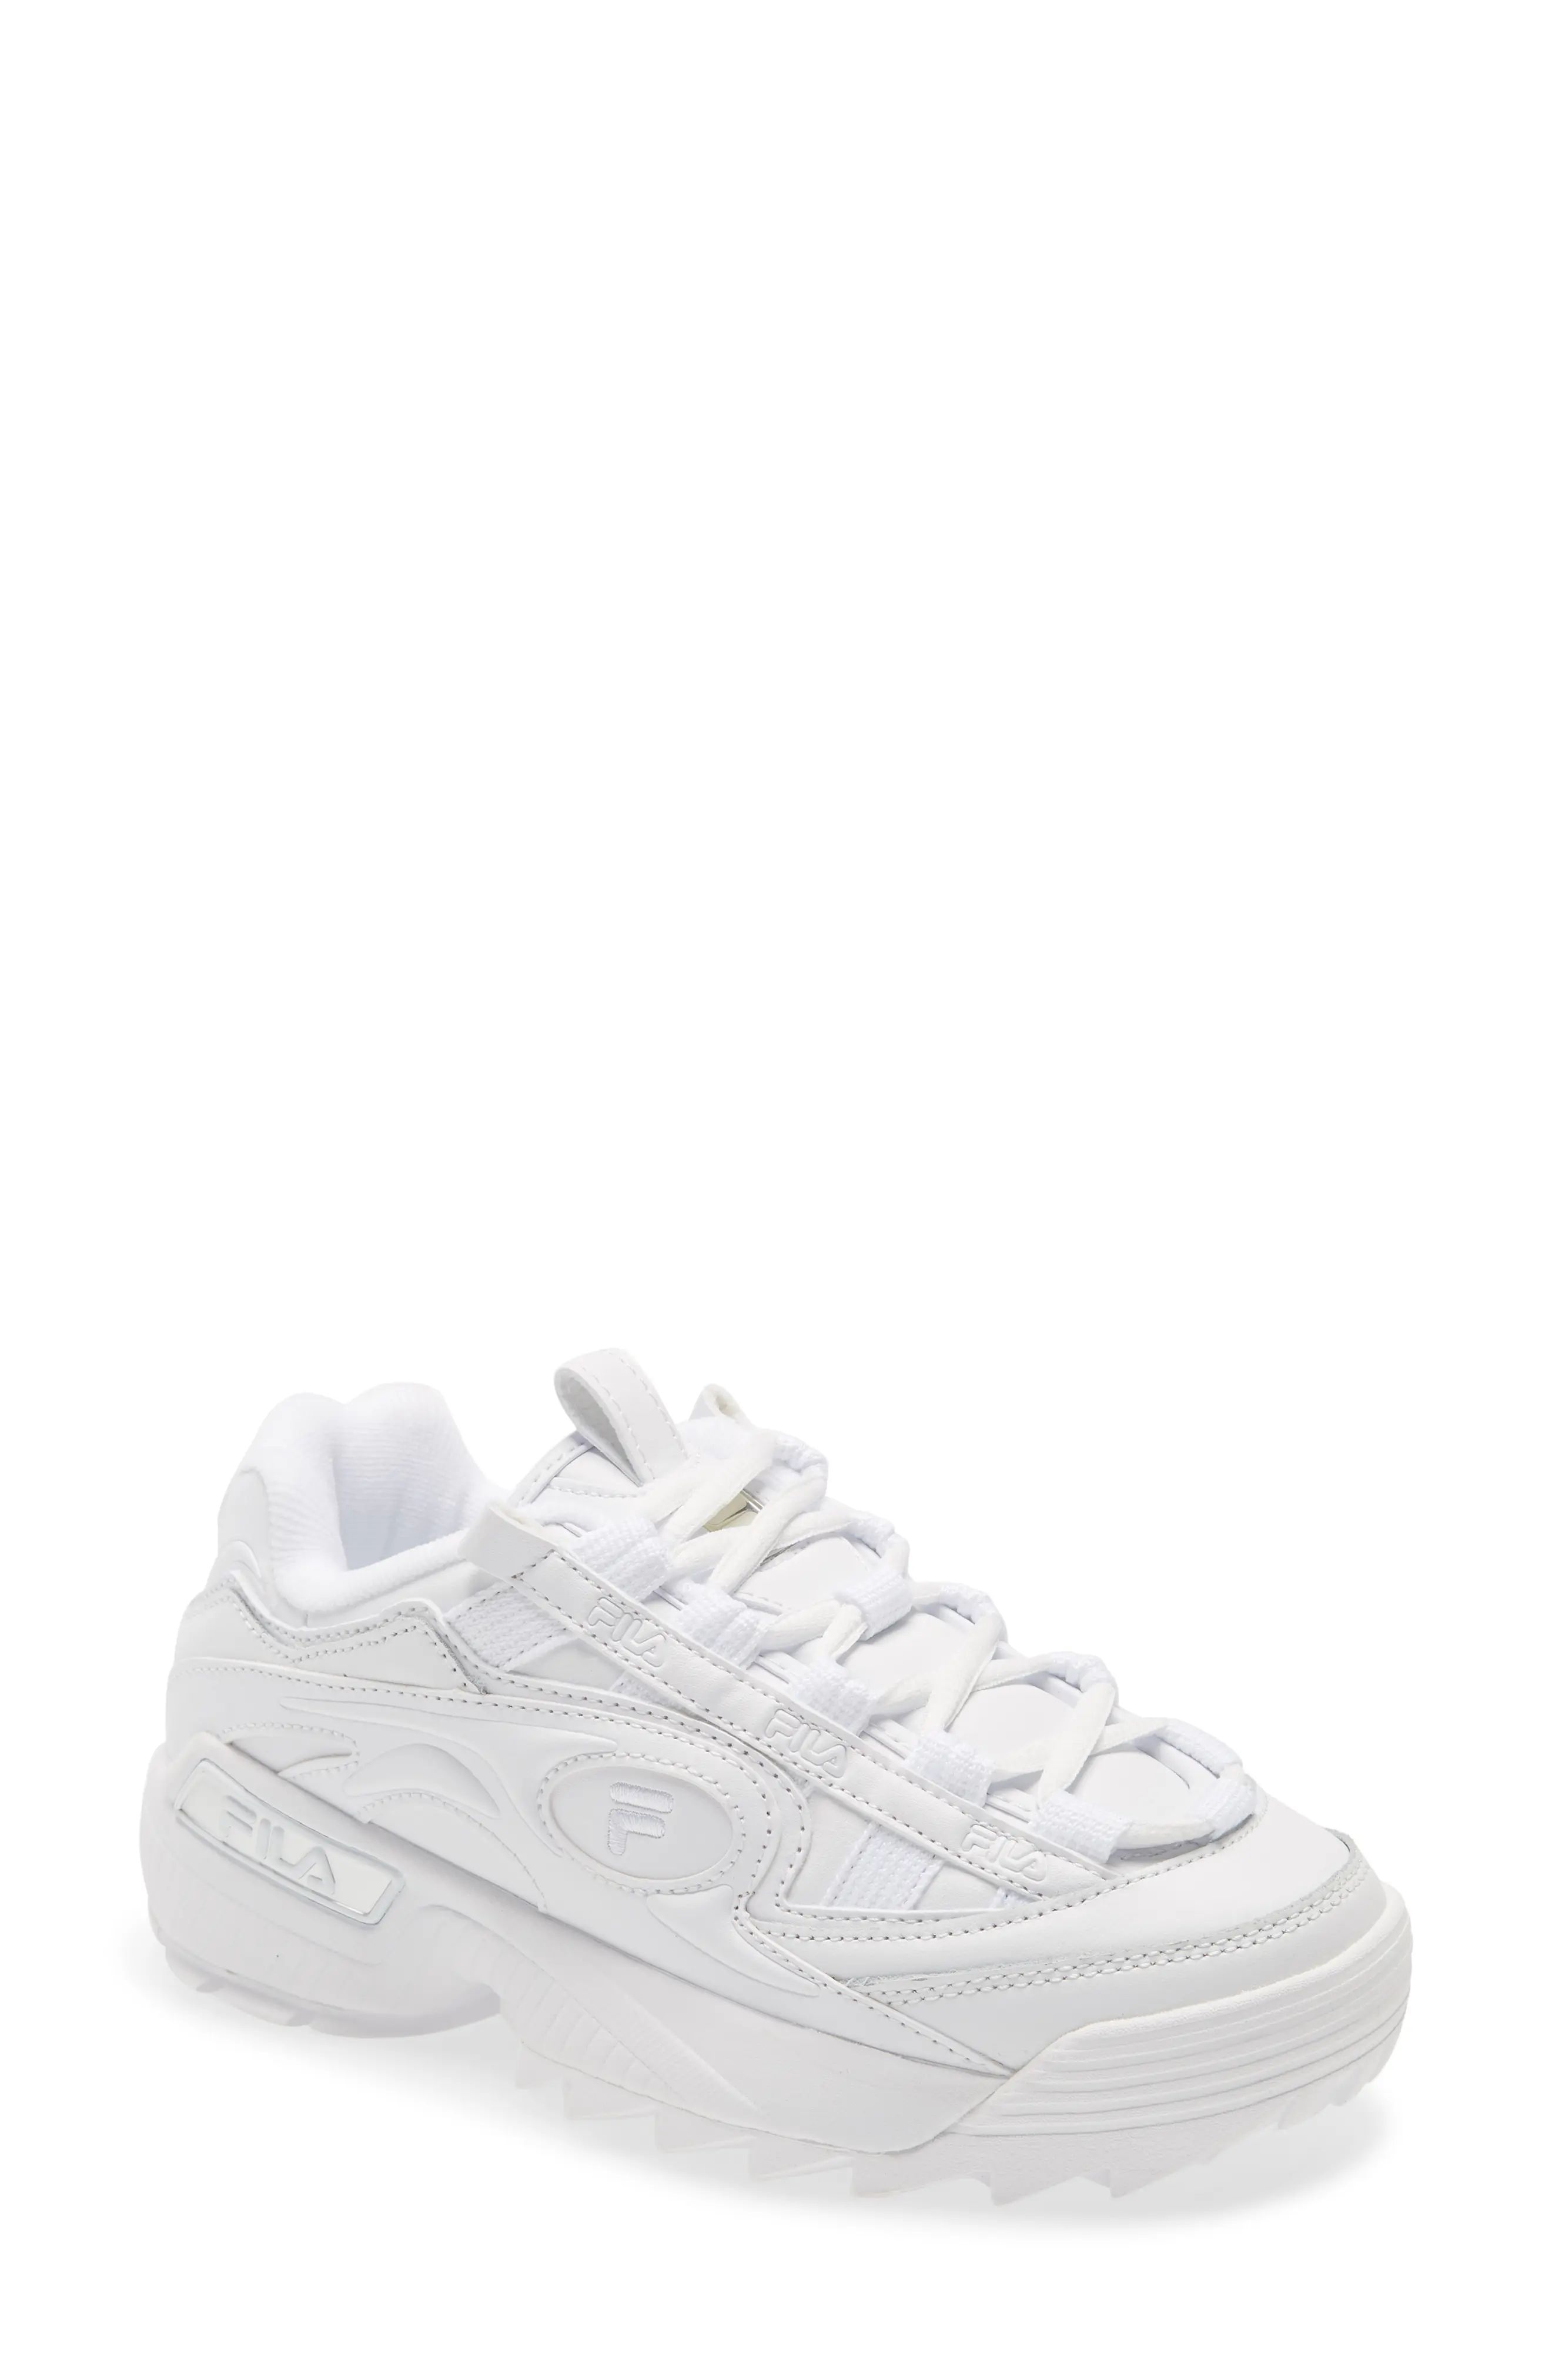 FILA D-Formation Chunky Sneaker in Whtwhtw100 at Nordstrom, Size 8.5 | Nordstrom